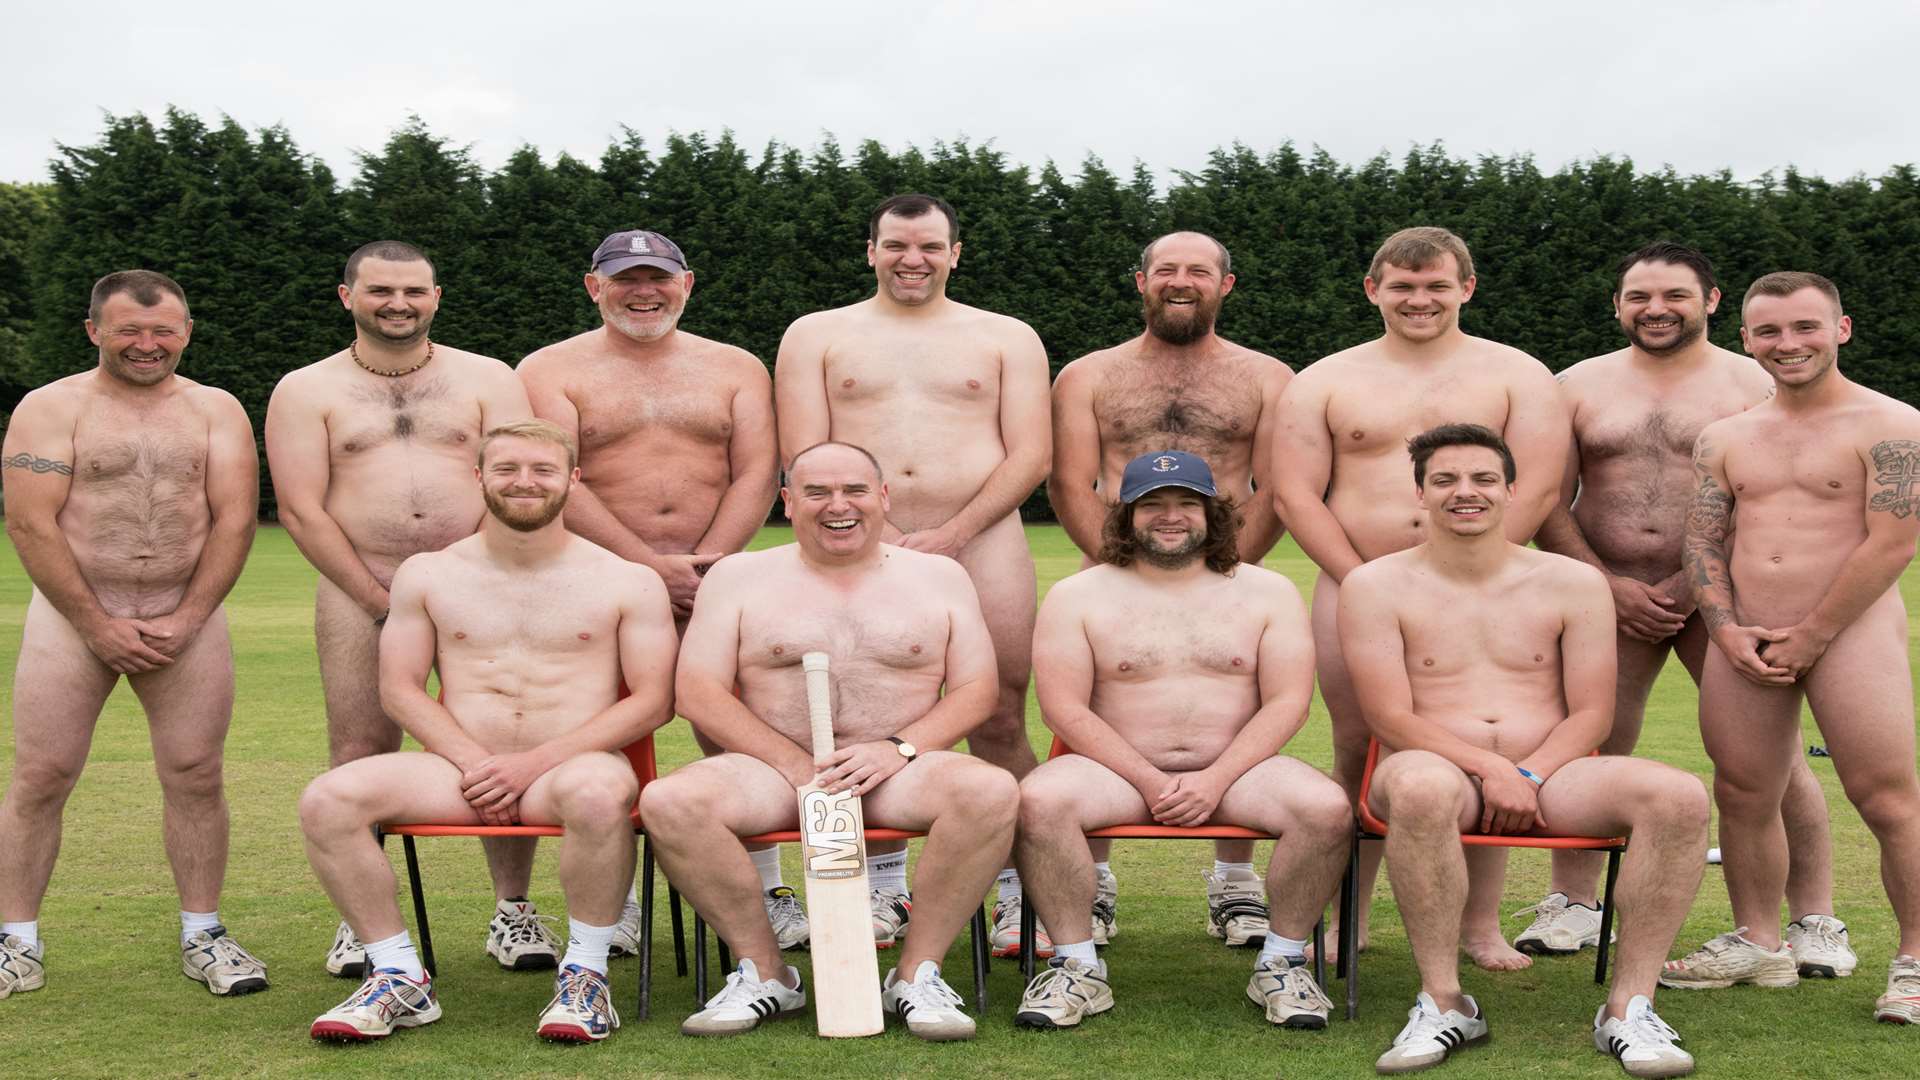 Newington Cricket Club players take the game to a nude level